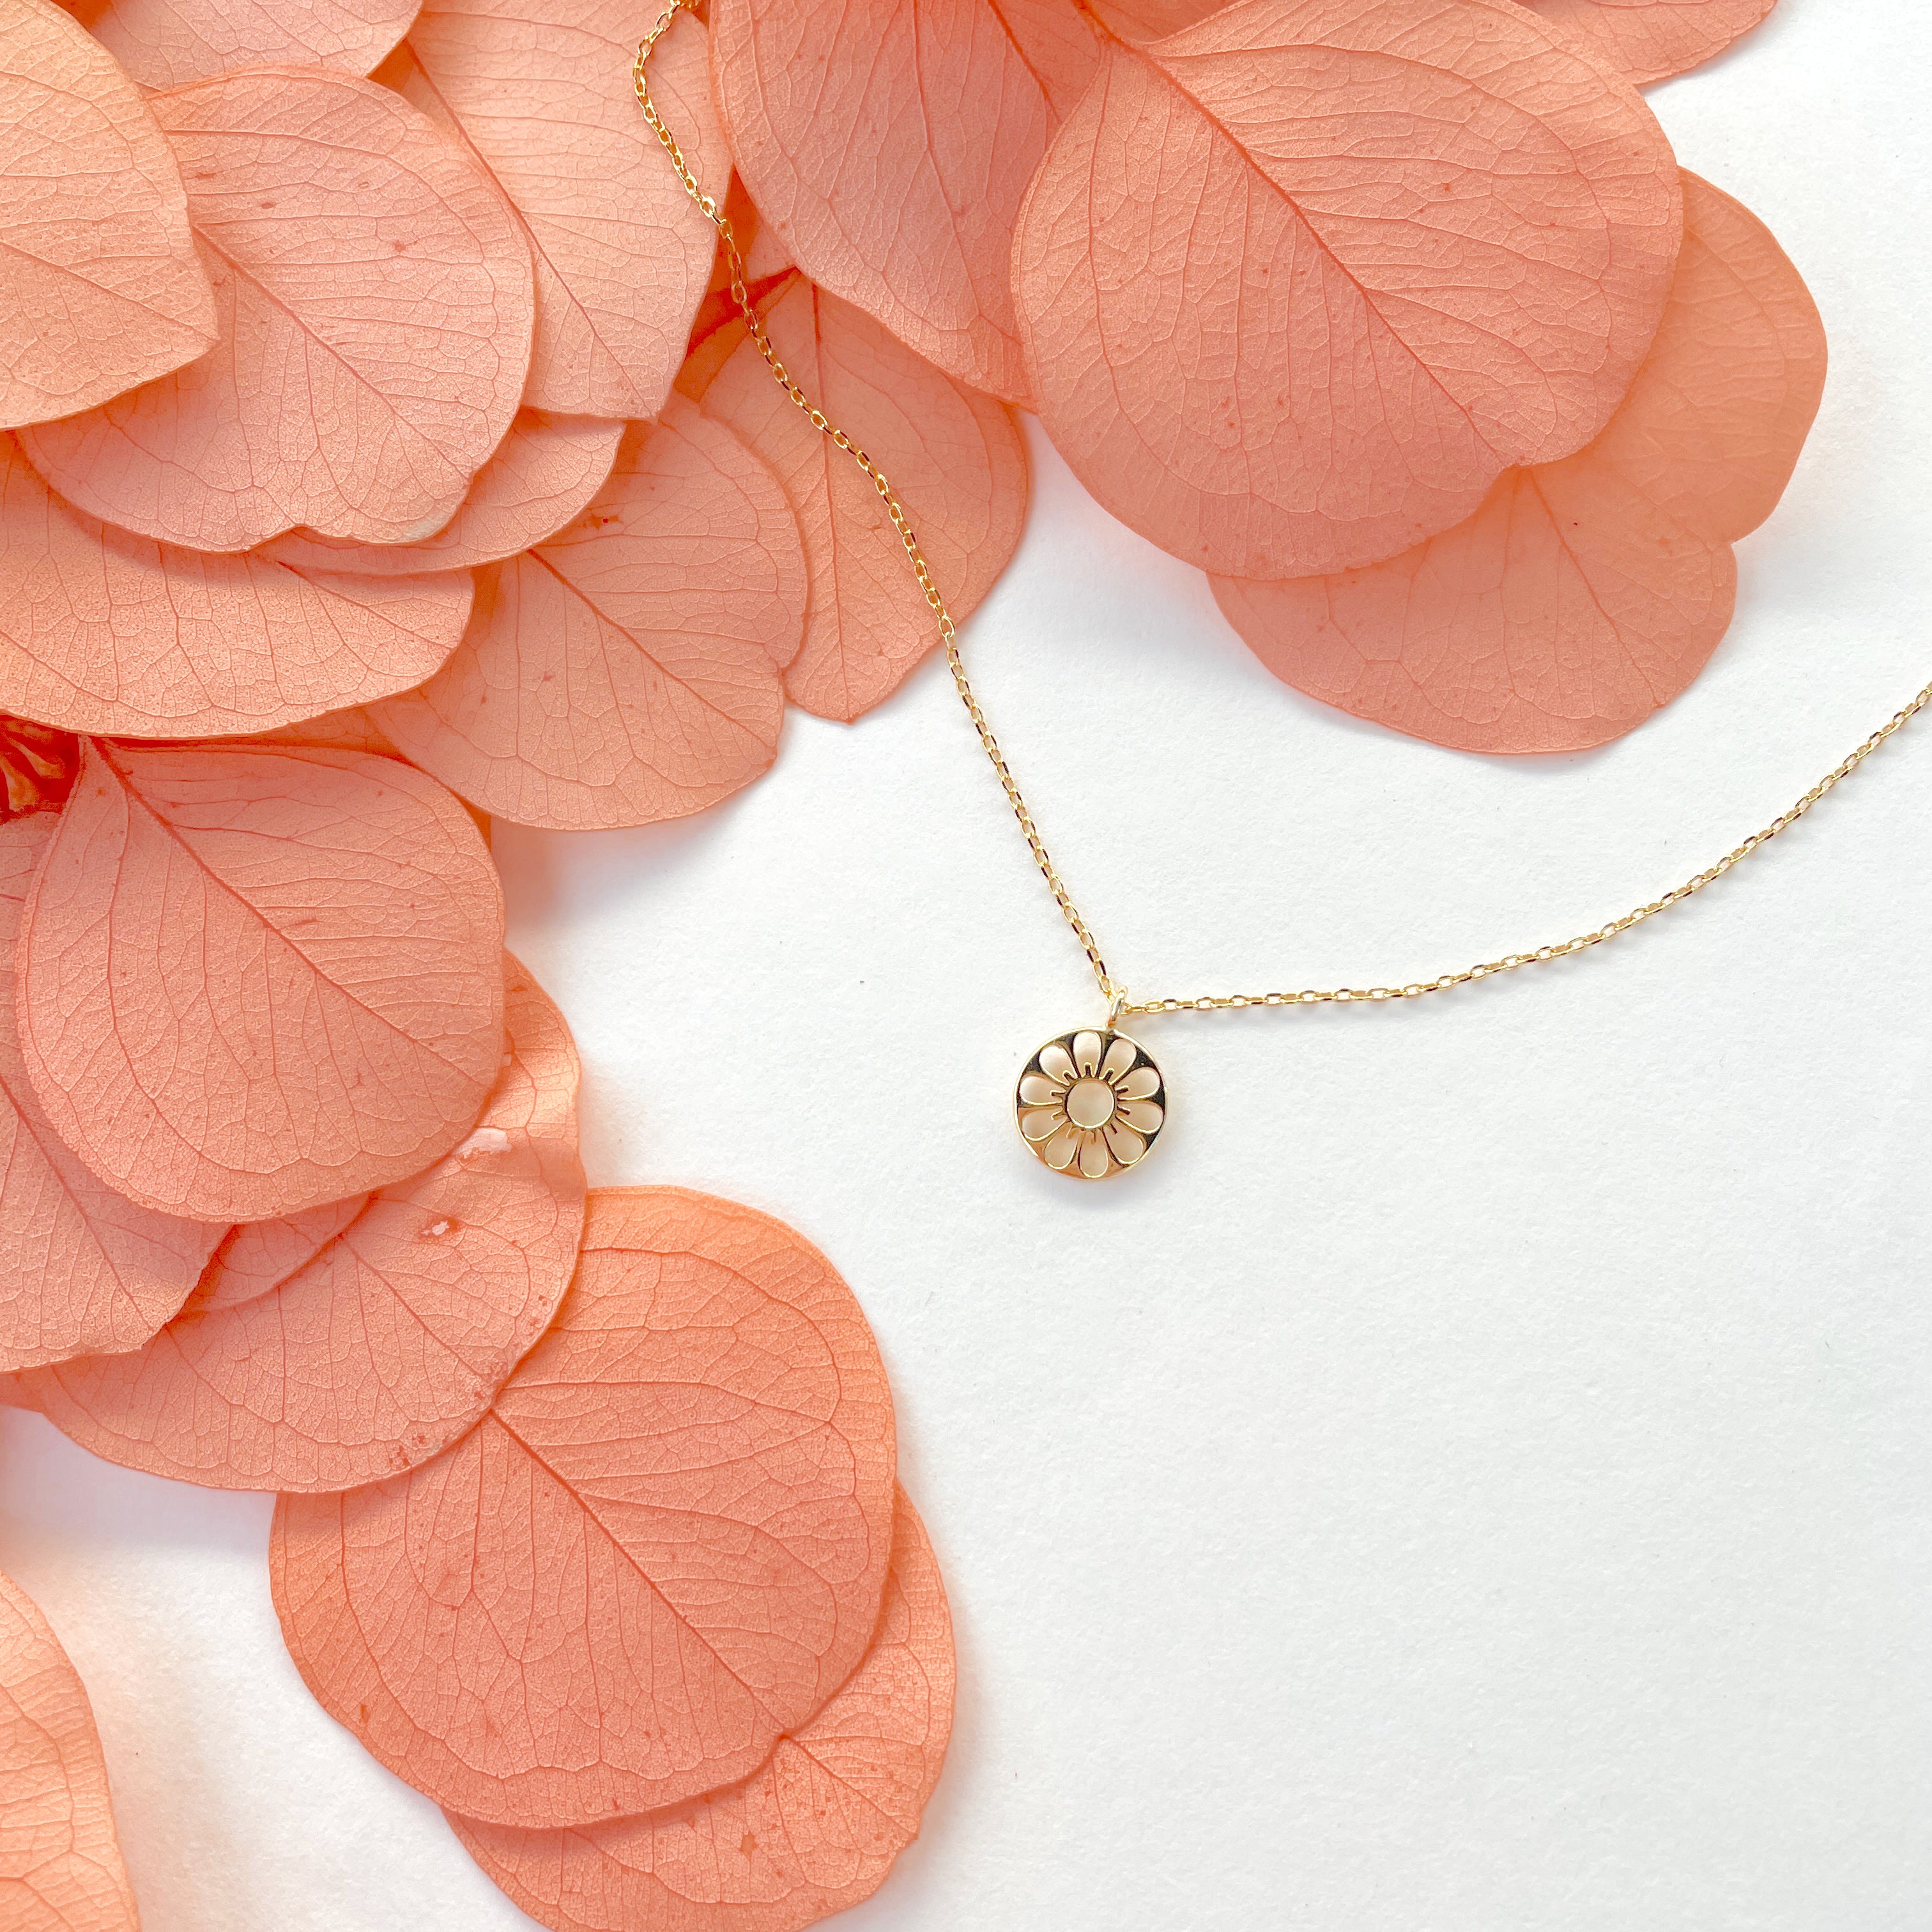 A  dainty gold chain necklace with a gold circle pendant in the center with a cut out of a daisy flower, photographed next to pink dried florals.